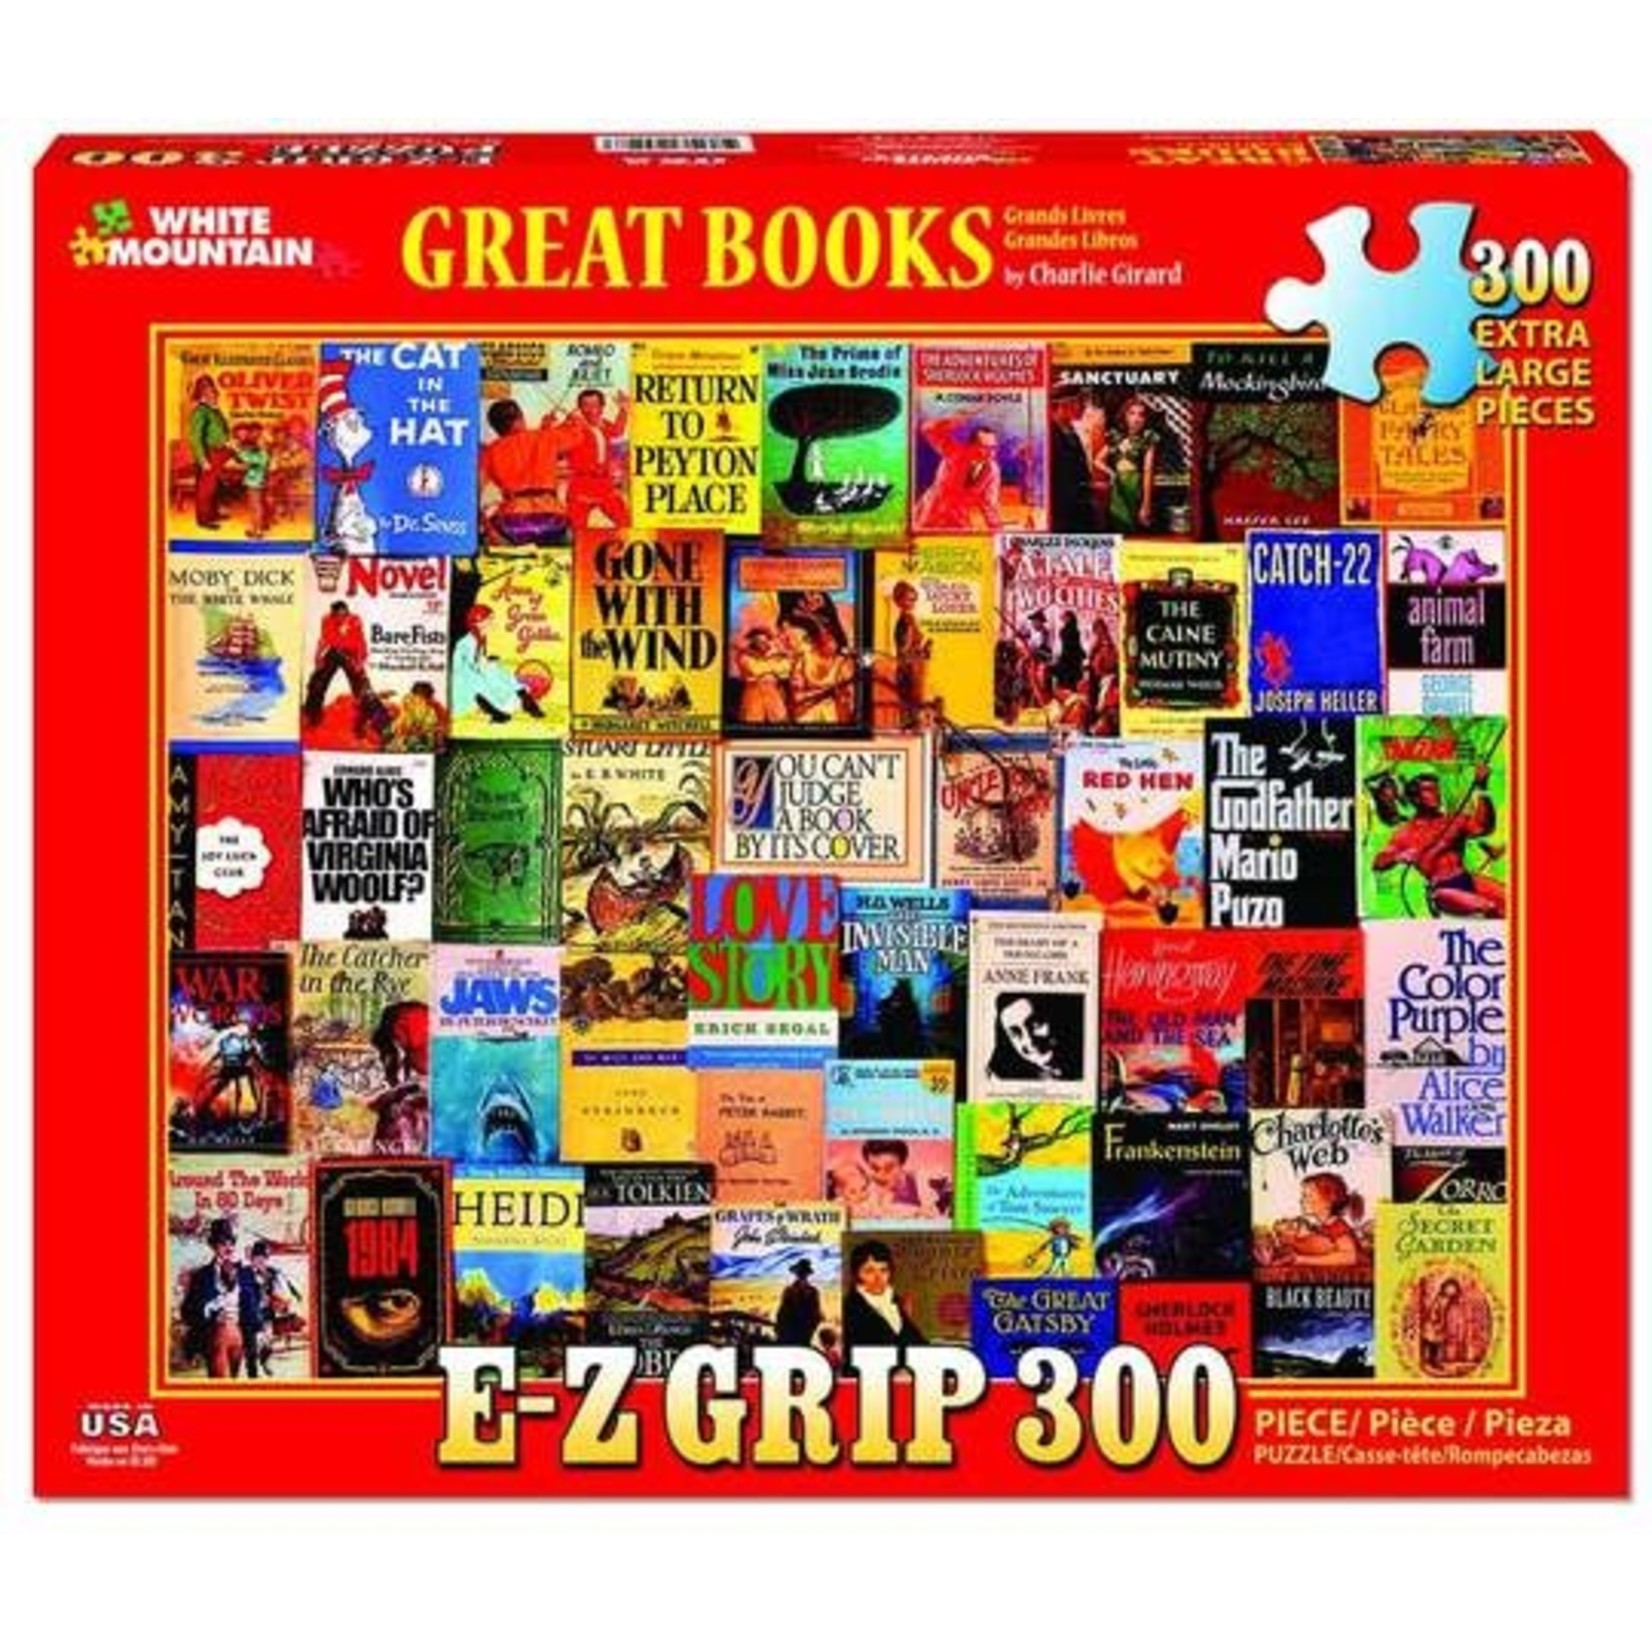 GREAT BOOKS PUZZLE